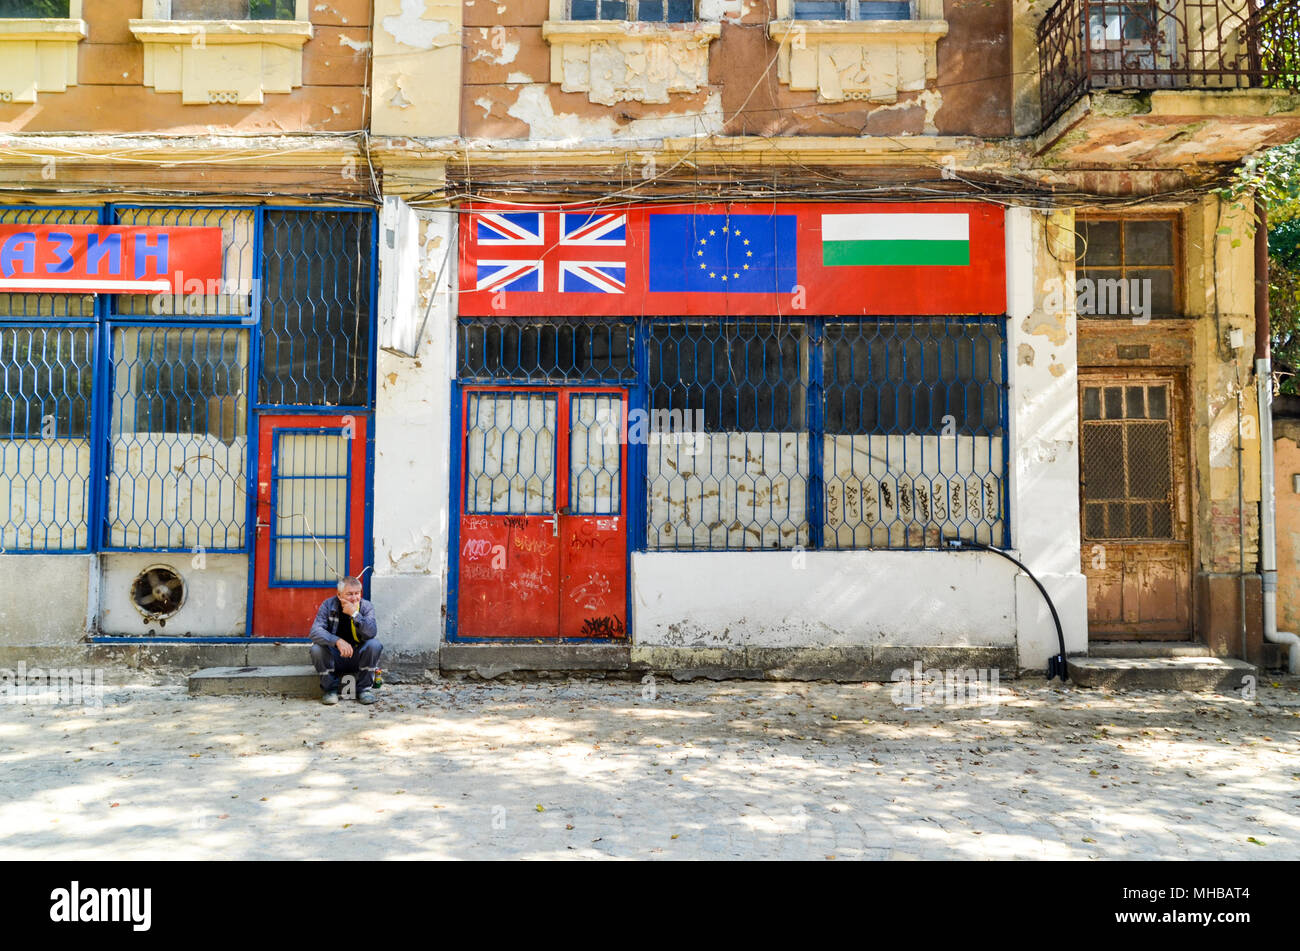 Old man sitting by a street, in front of a shop with the Bulgarian, UK and EU flags. Plovdiv, Bulgaria Stock Photo